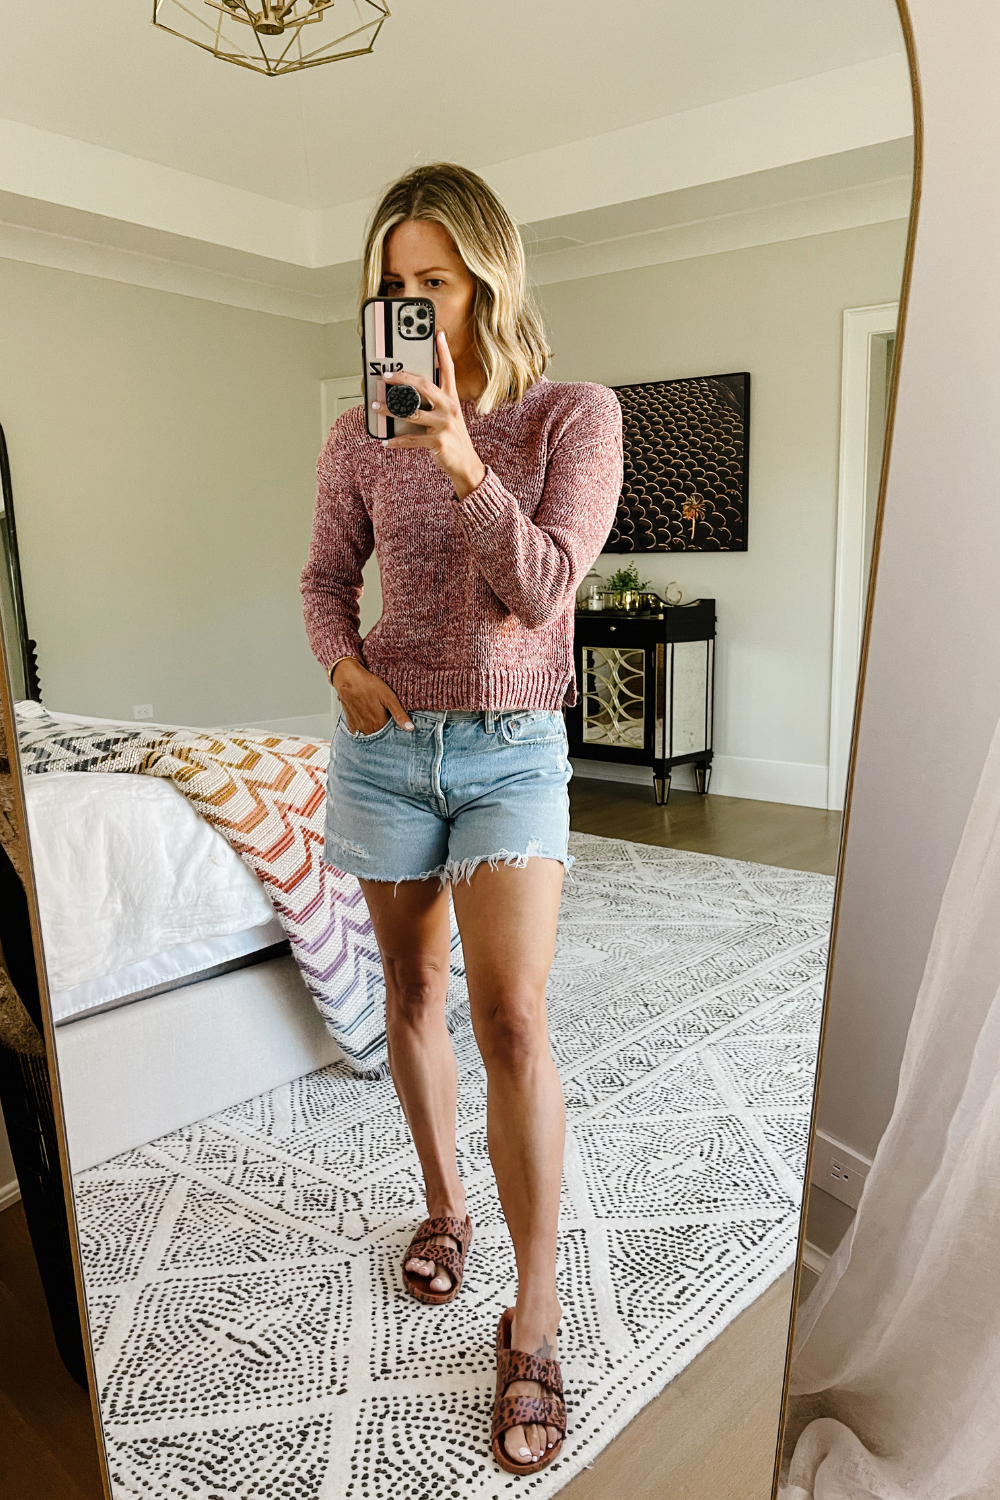 Suzanne wearing a Madewell sweater, AGOLDE shorts, and leopard slides